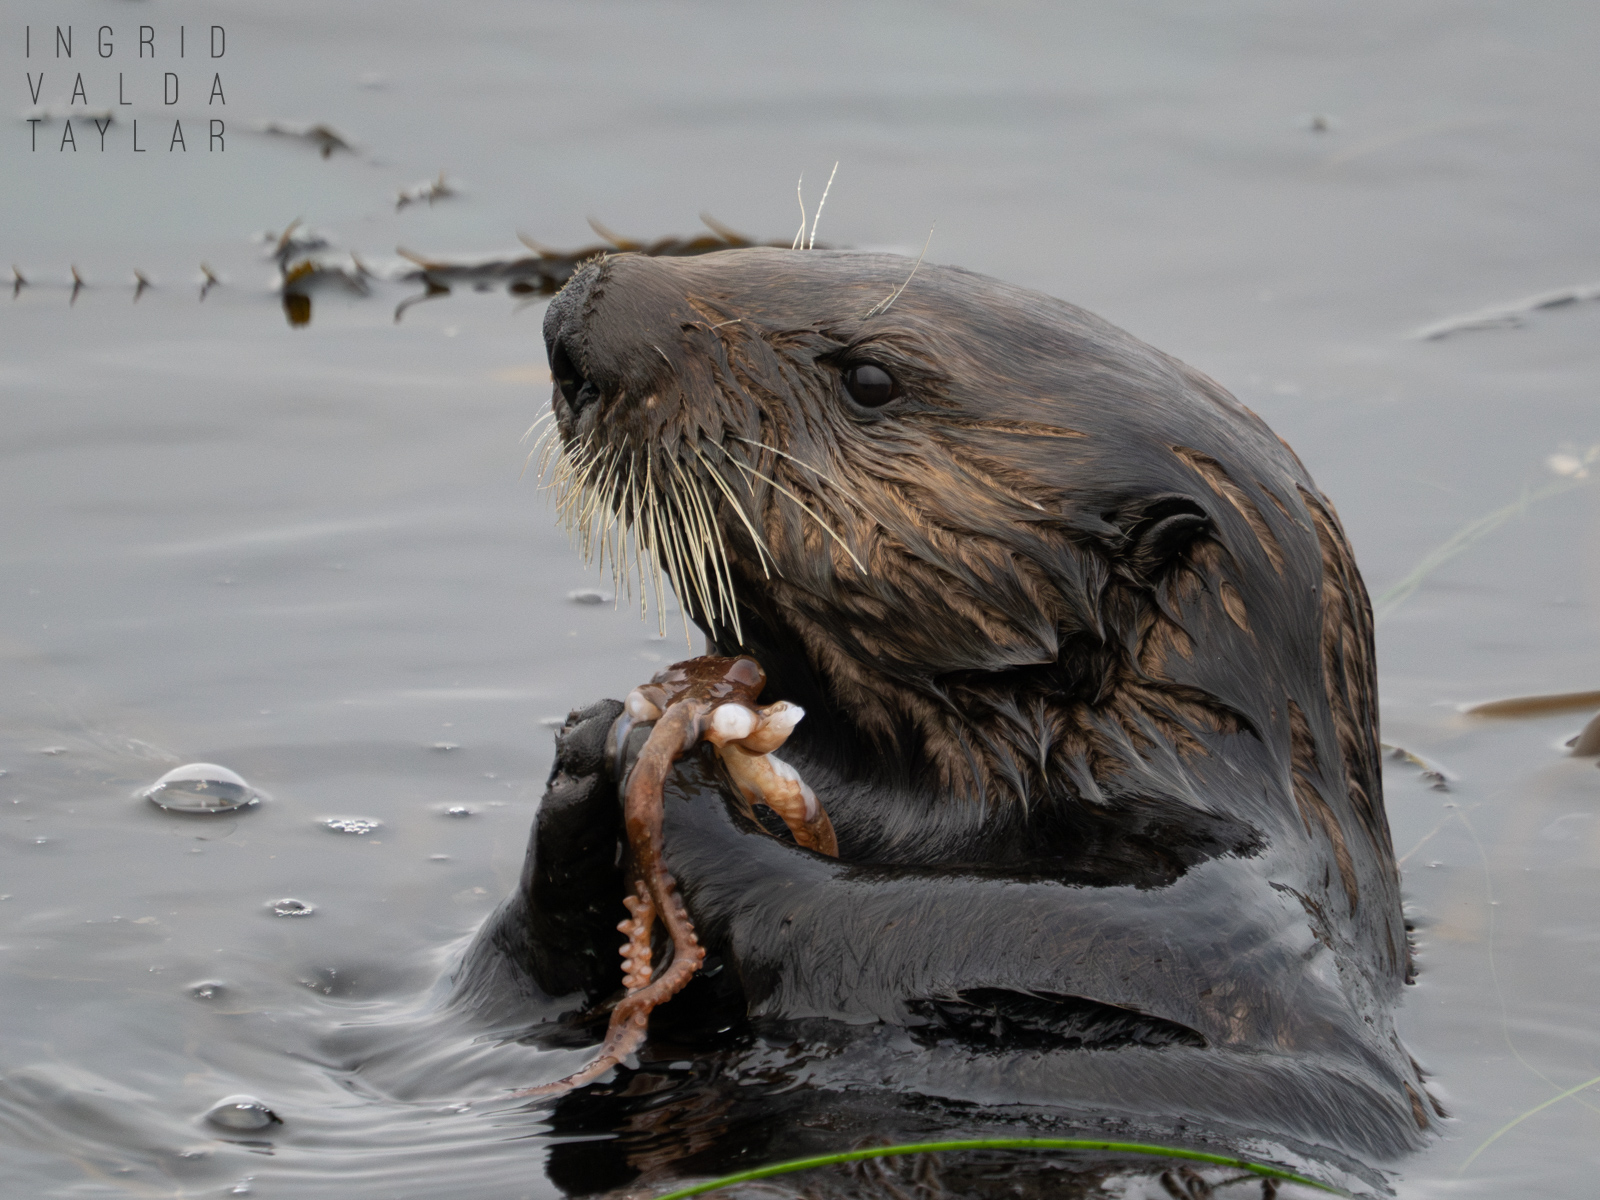 Sea Otter with Octopus Meal